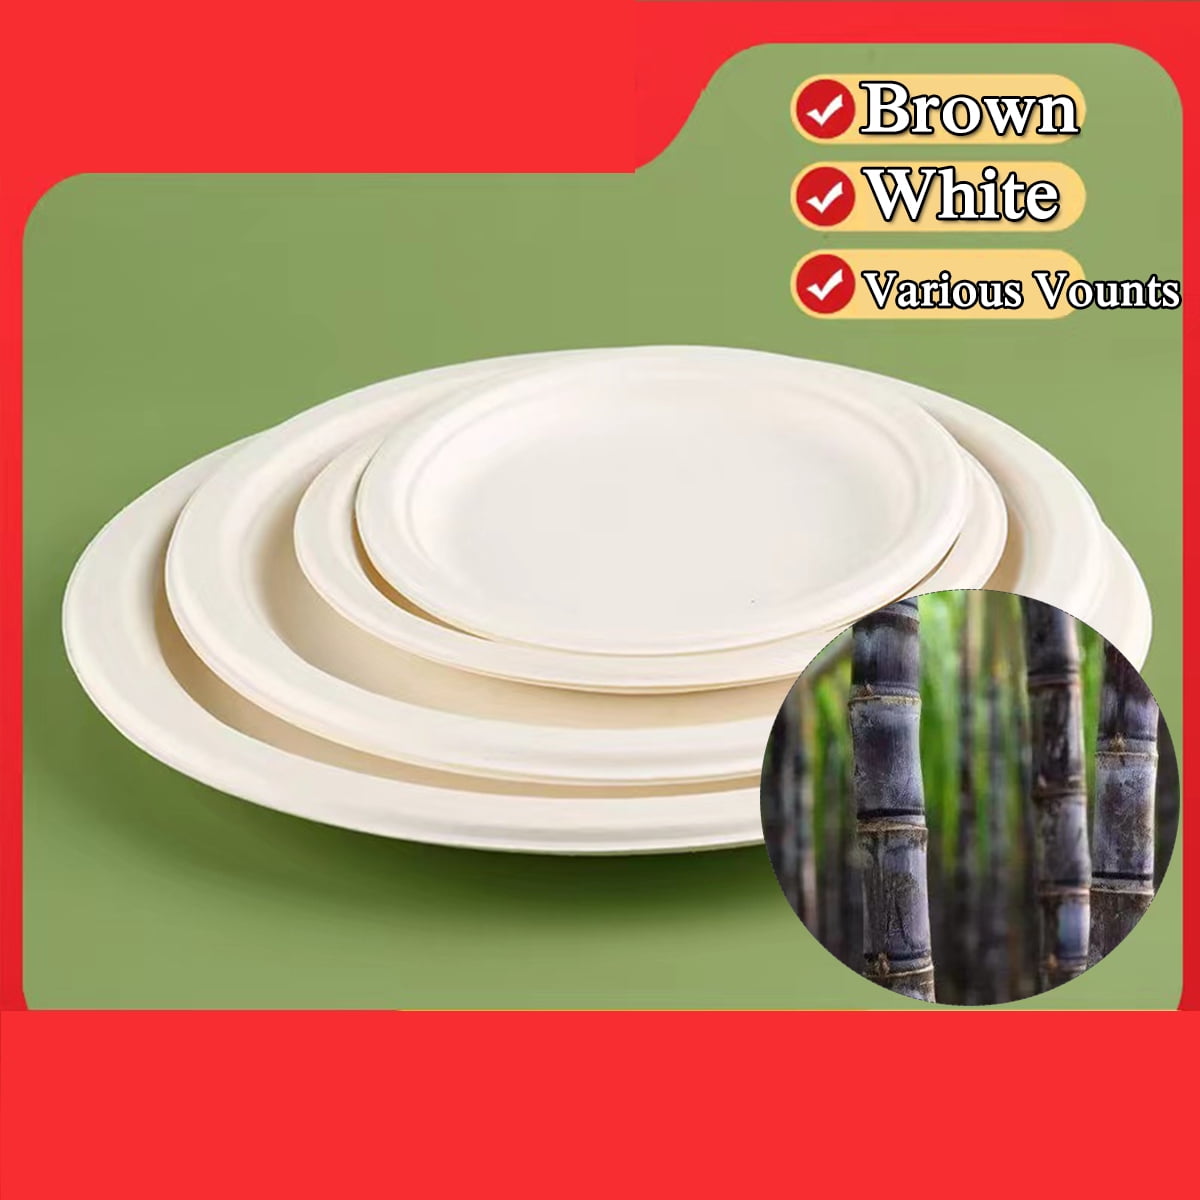 EcoAvance Oval Paper Plates 60 Pack, Large Paper Plates 12 inch, 100%  Compostable Paper Plates Eco Friendly Disposable Plates, Oval Paper Plates  Heavy